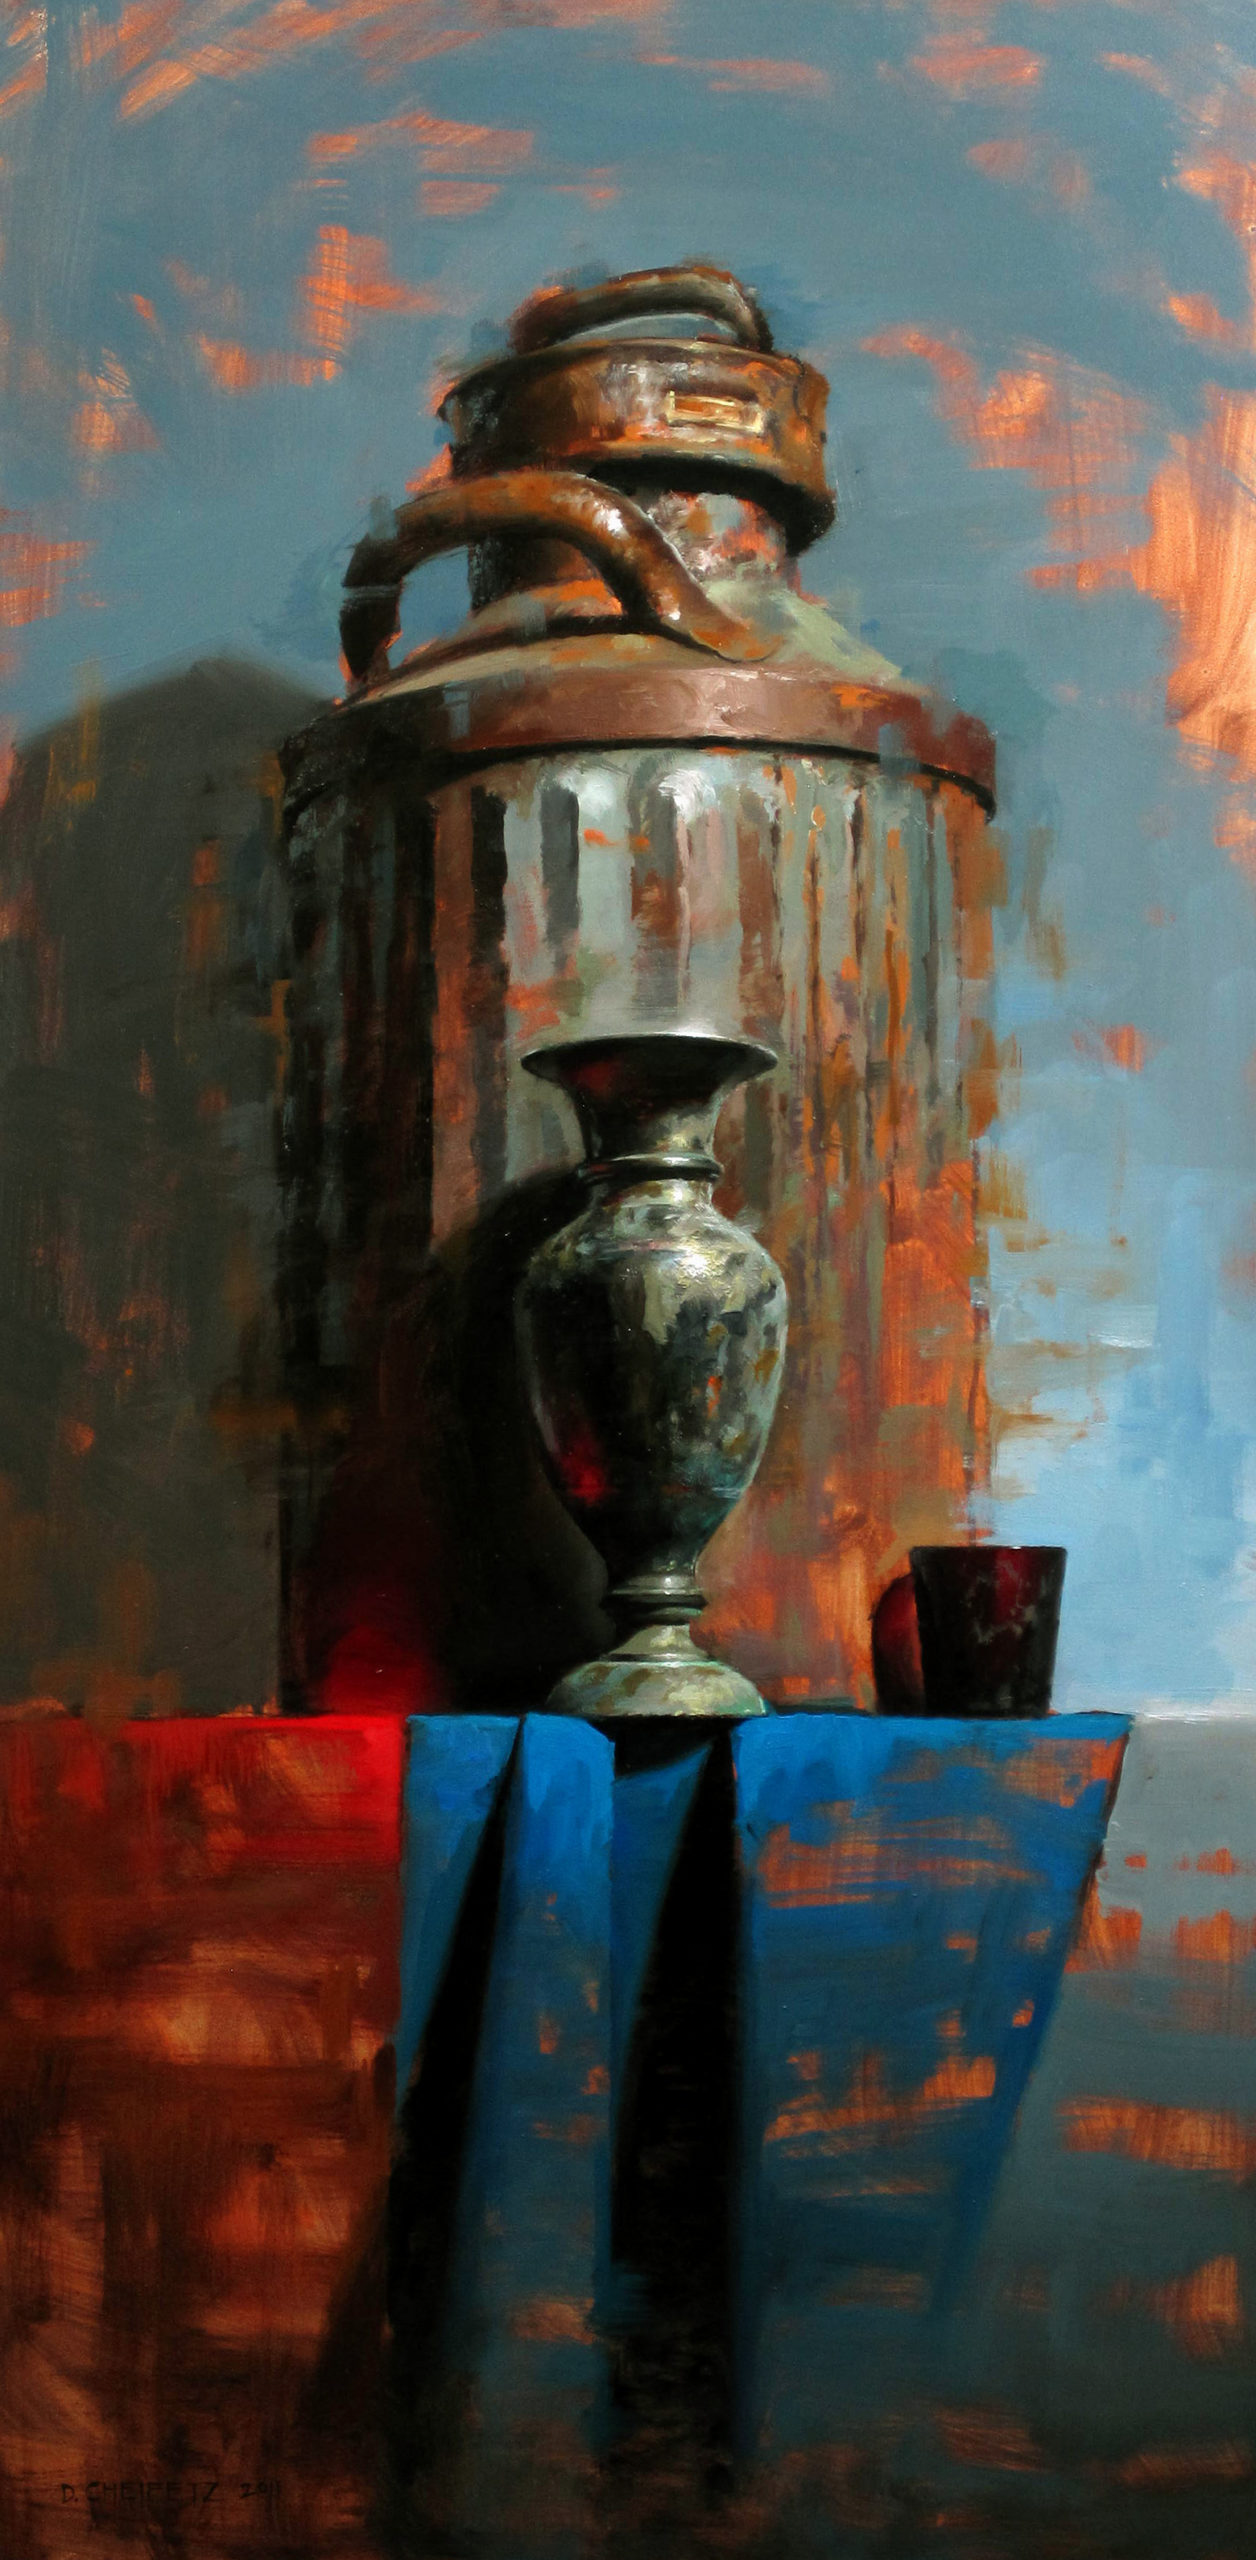 Becoming a professional artist - David Cheifetz, "Balance in Red," 24 x 12 inches, Oil on panel